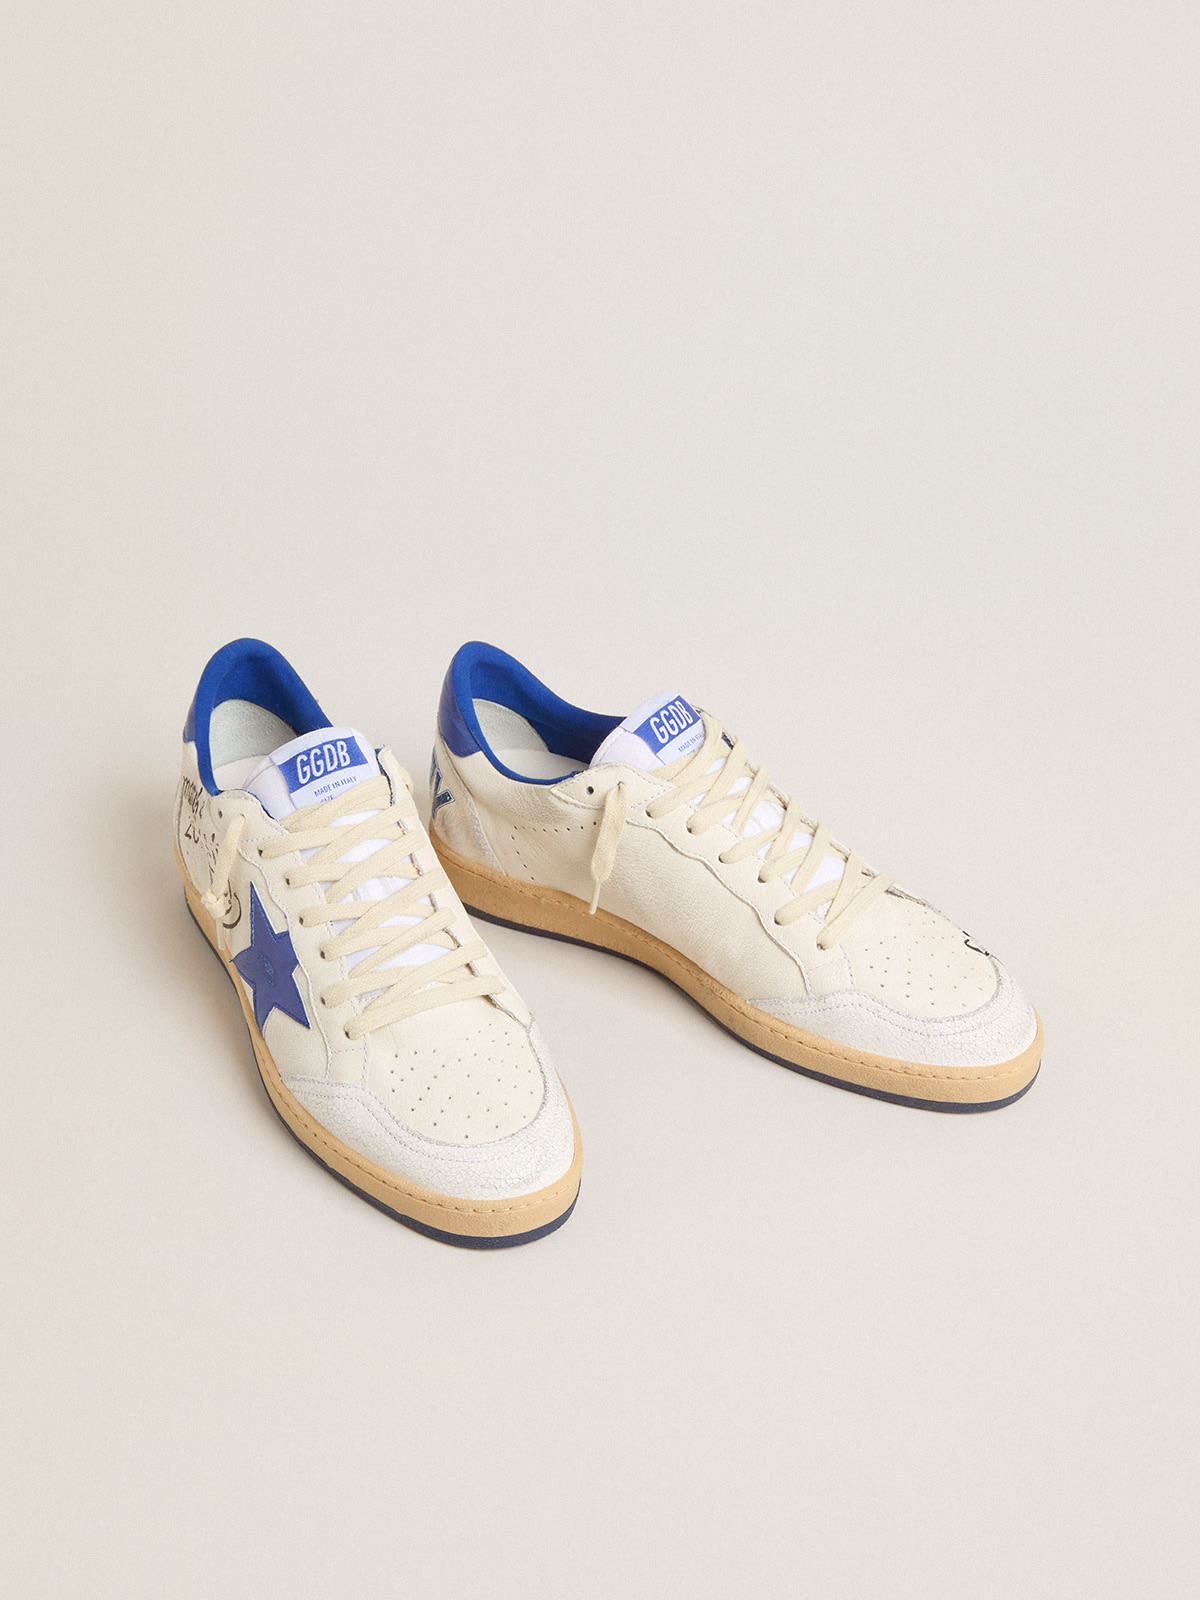 Golden Goose - Men's Ball Star Wishes in white nappa leather with a bright blue star and heel tab in 